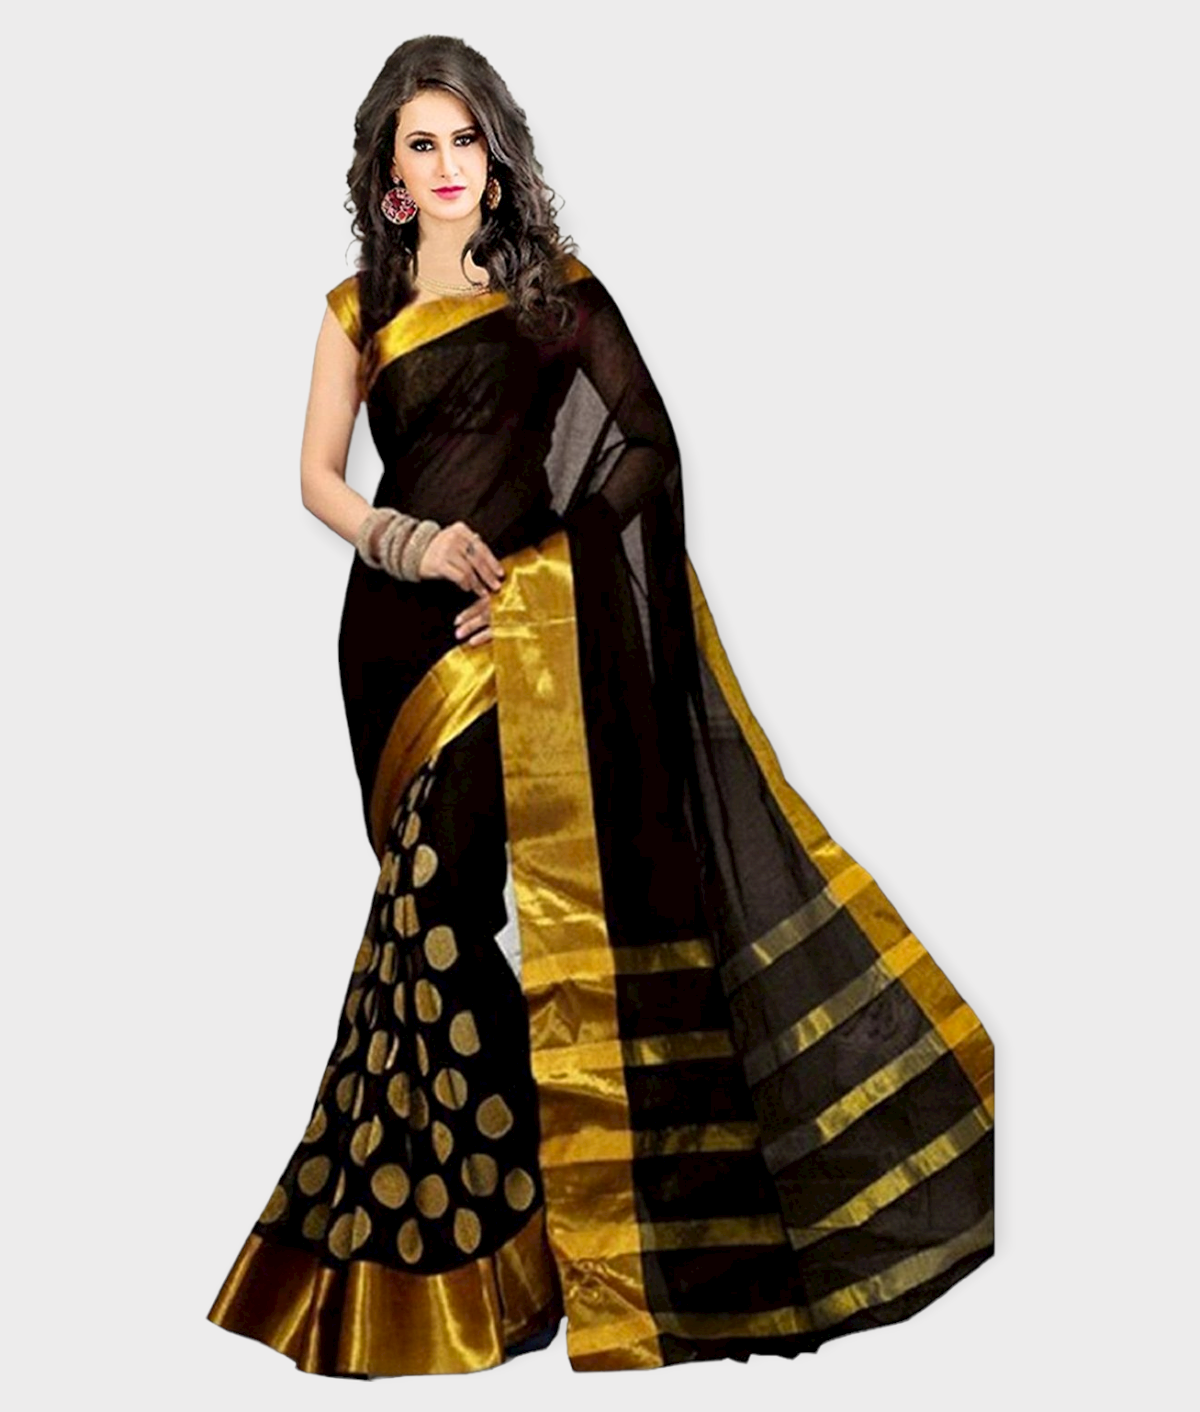     			Bhuwal Fashion - Black Cotton Blend Saree With Blouse Piece (Pack of 1)